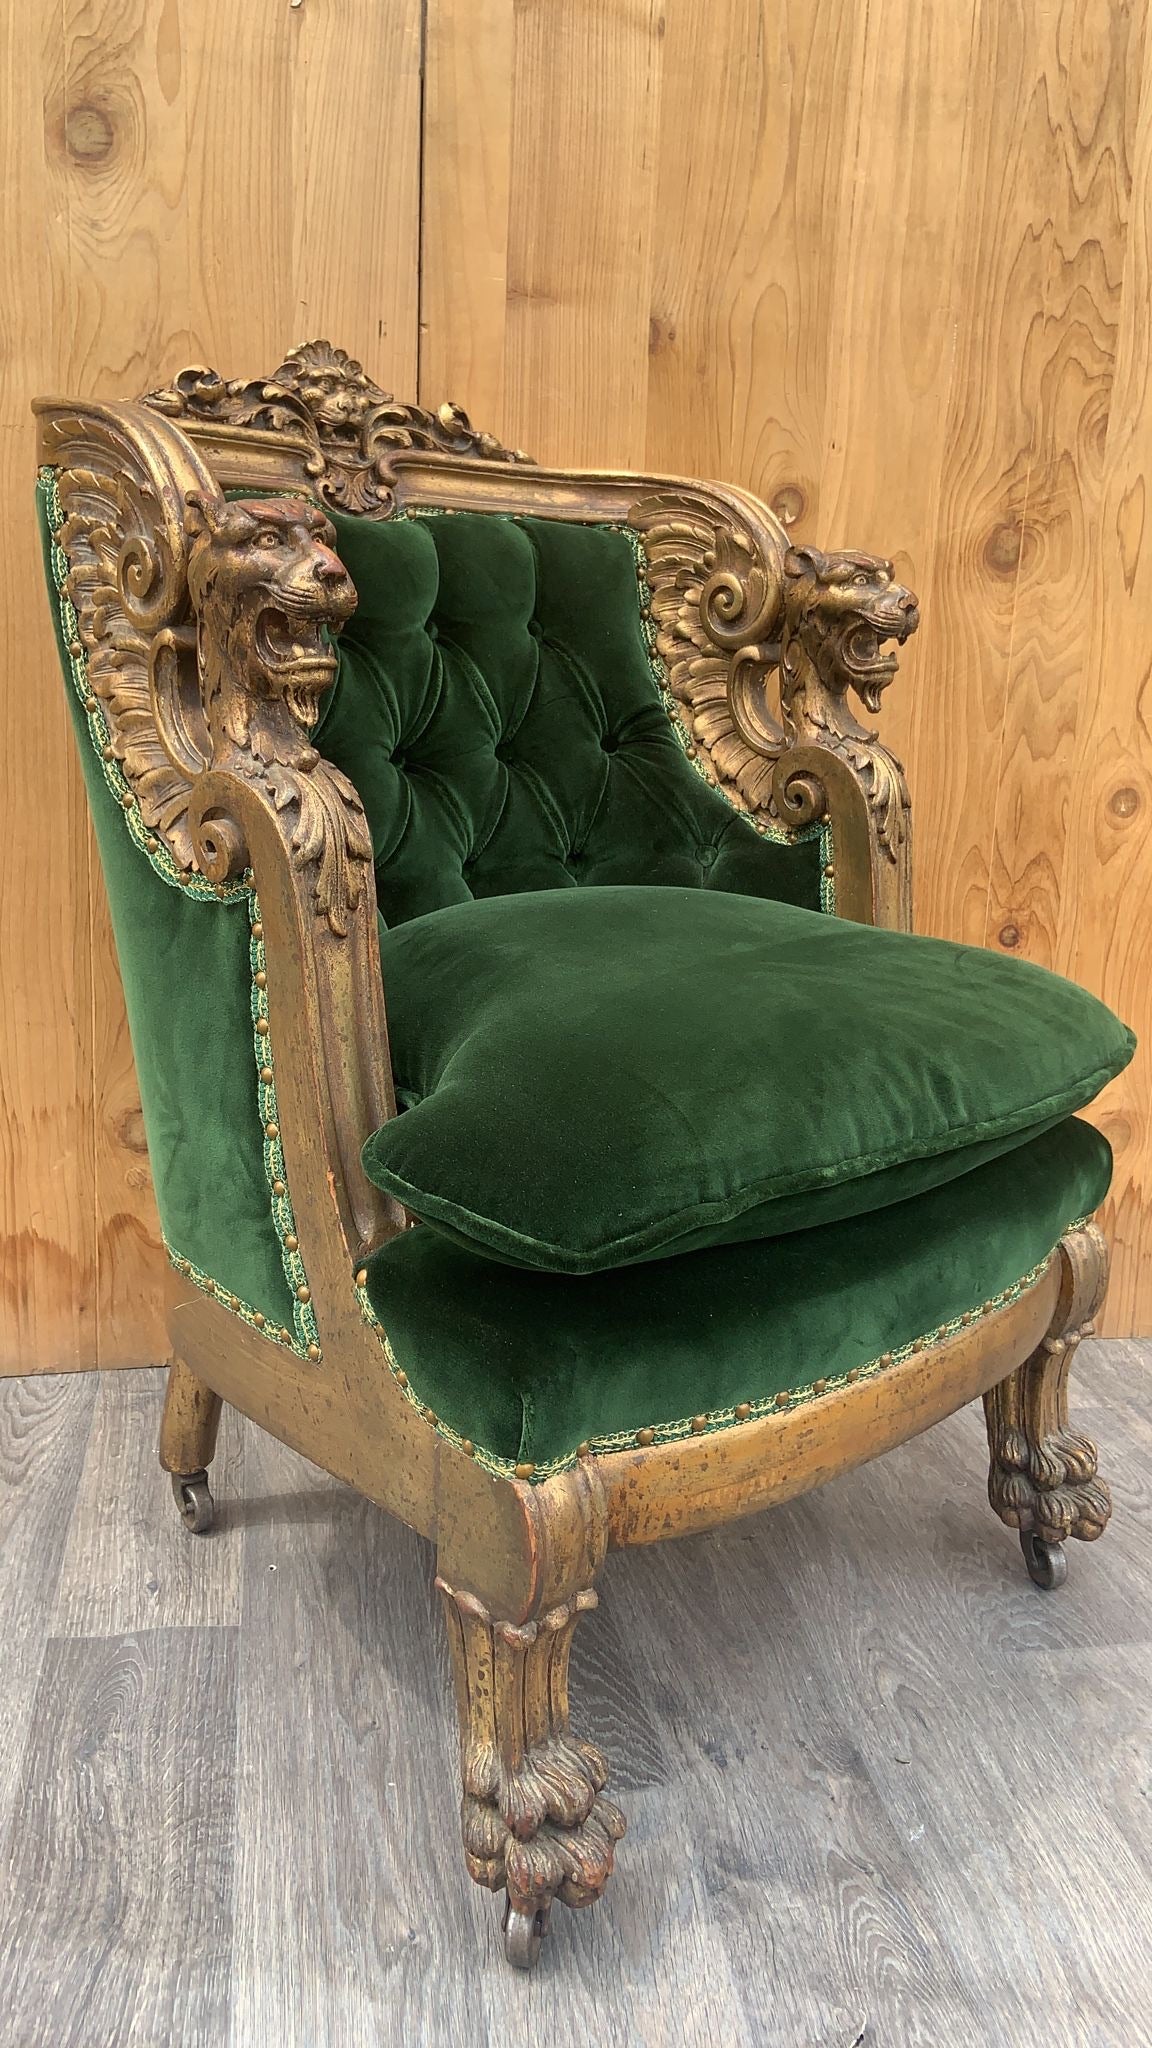 Antique French Renaissance Carved & Gilded Figural Winged Griffen Arm Chair and Ottoman Newly Upholstered In Plush "Emerald" - Set of 2